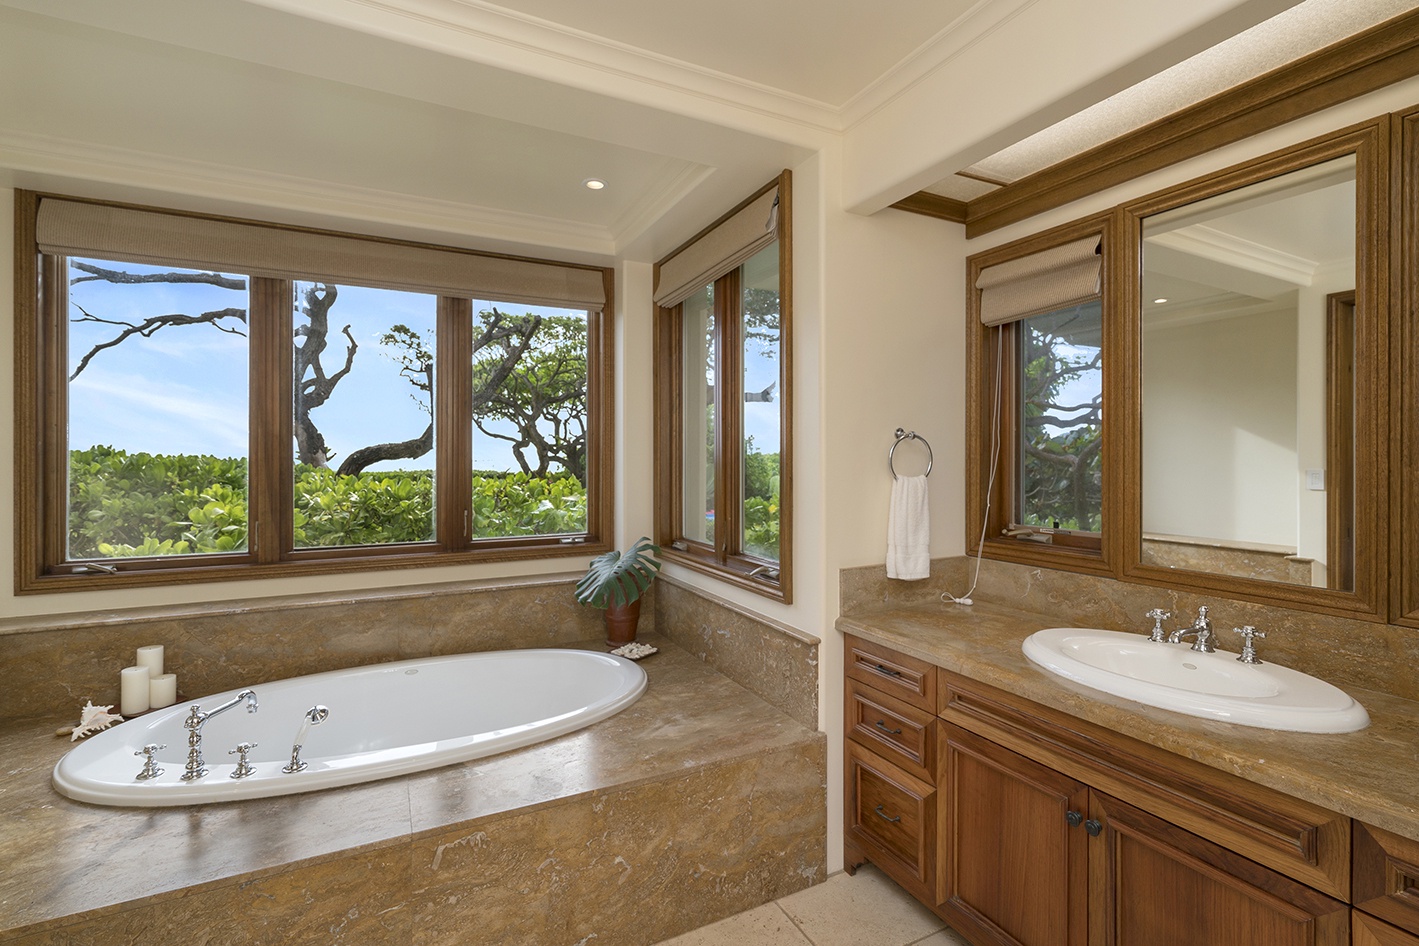 Kailua Vacation Rentals, Kailua's Kai Moena - Main house: Guest Bedroom 2 ensuite with jetted tub and walk in shower.